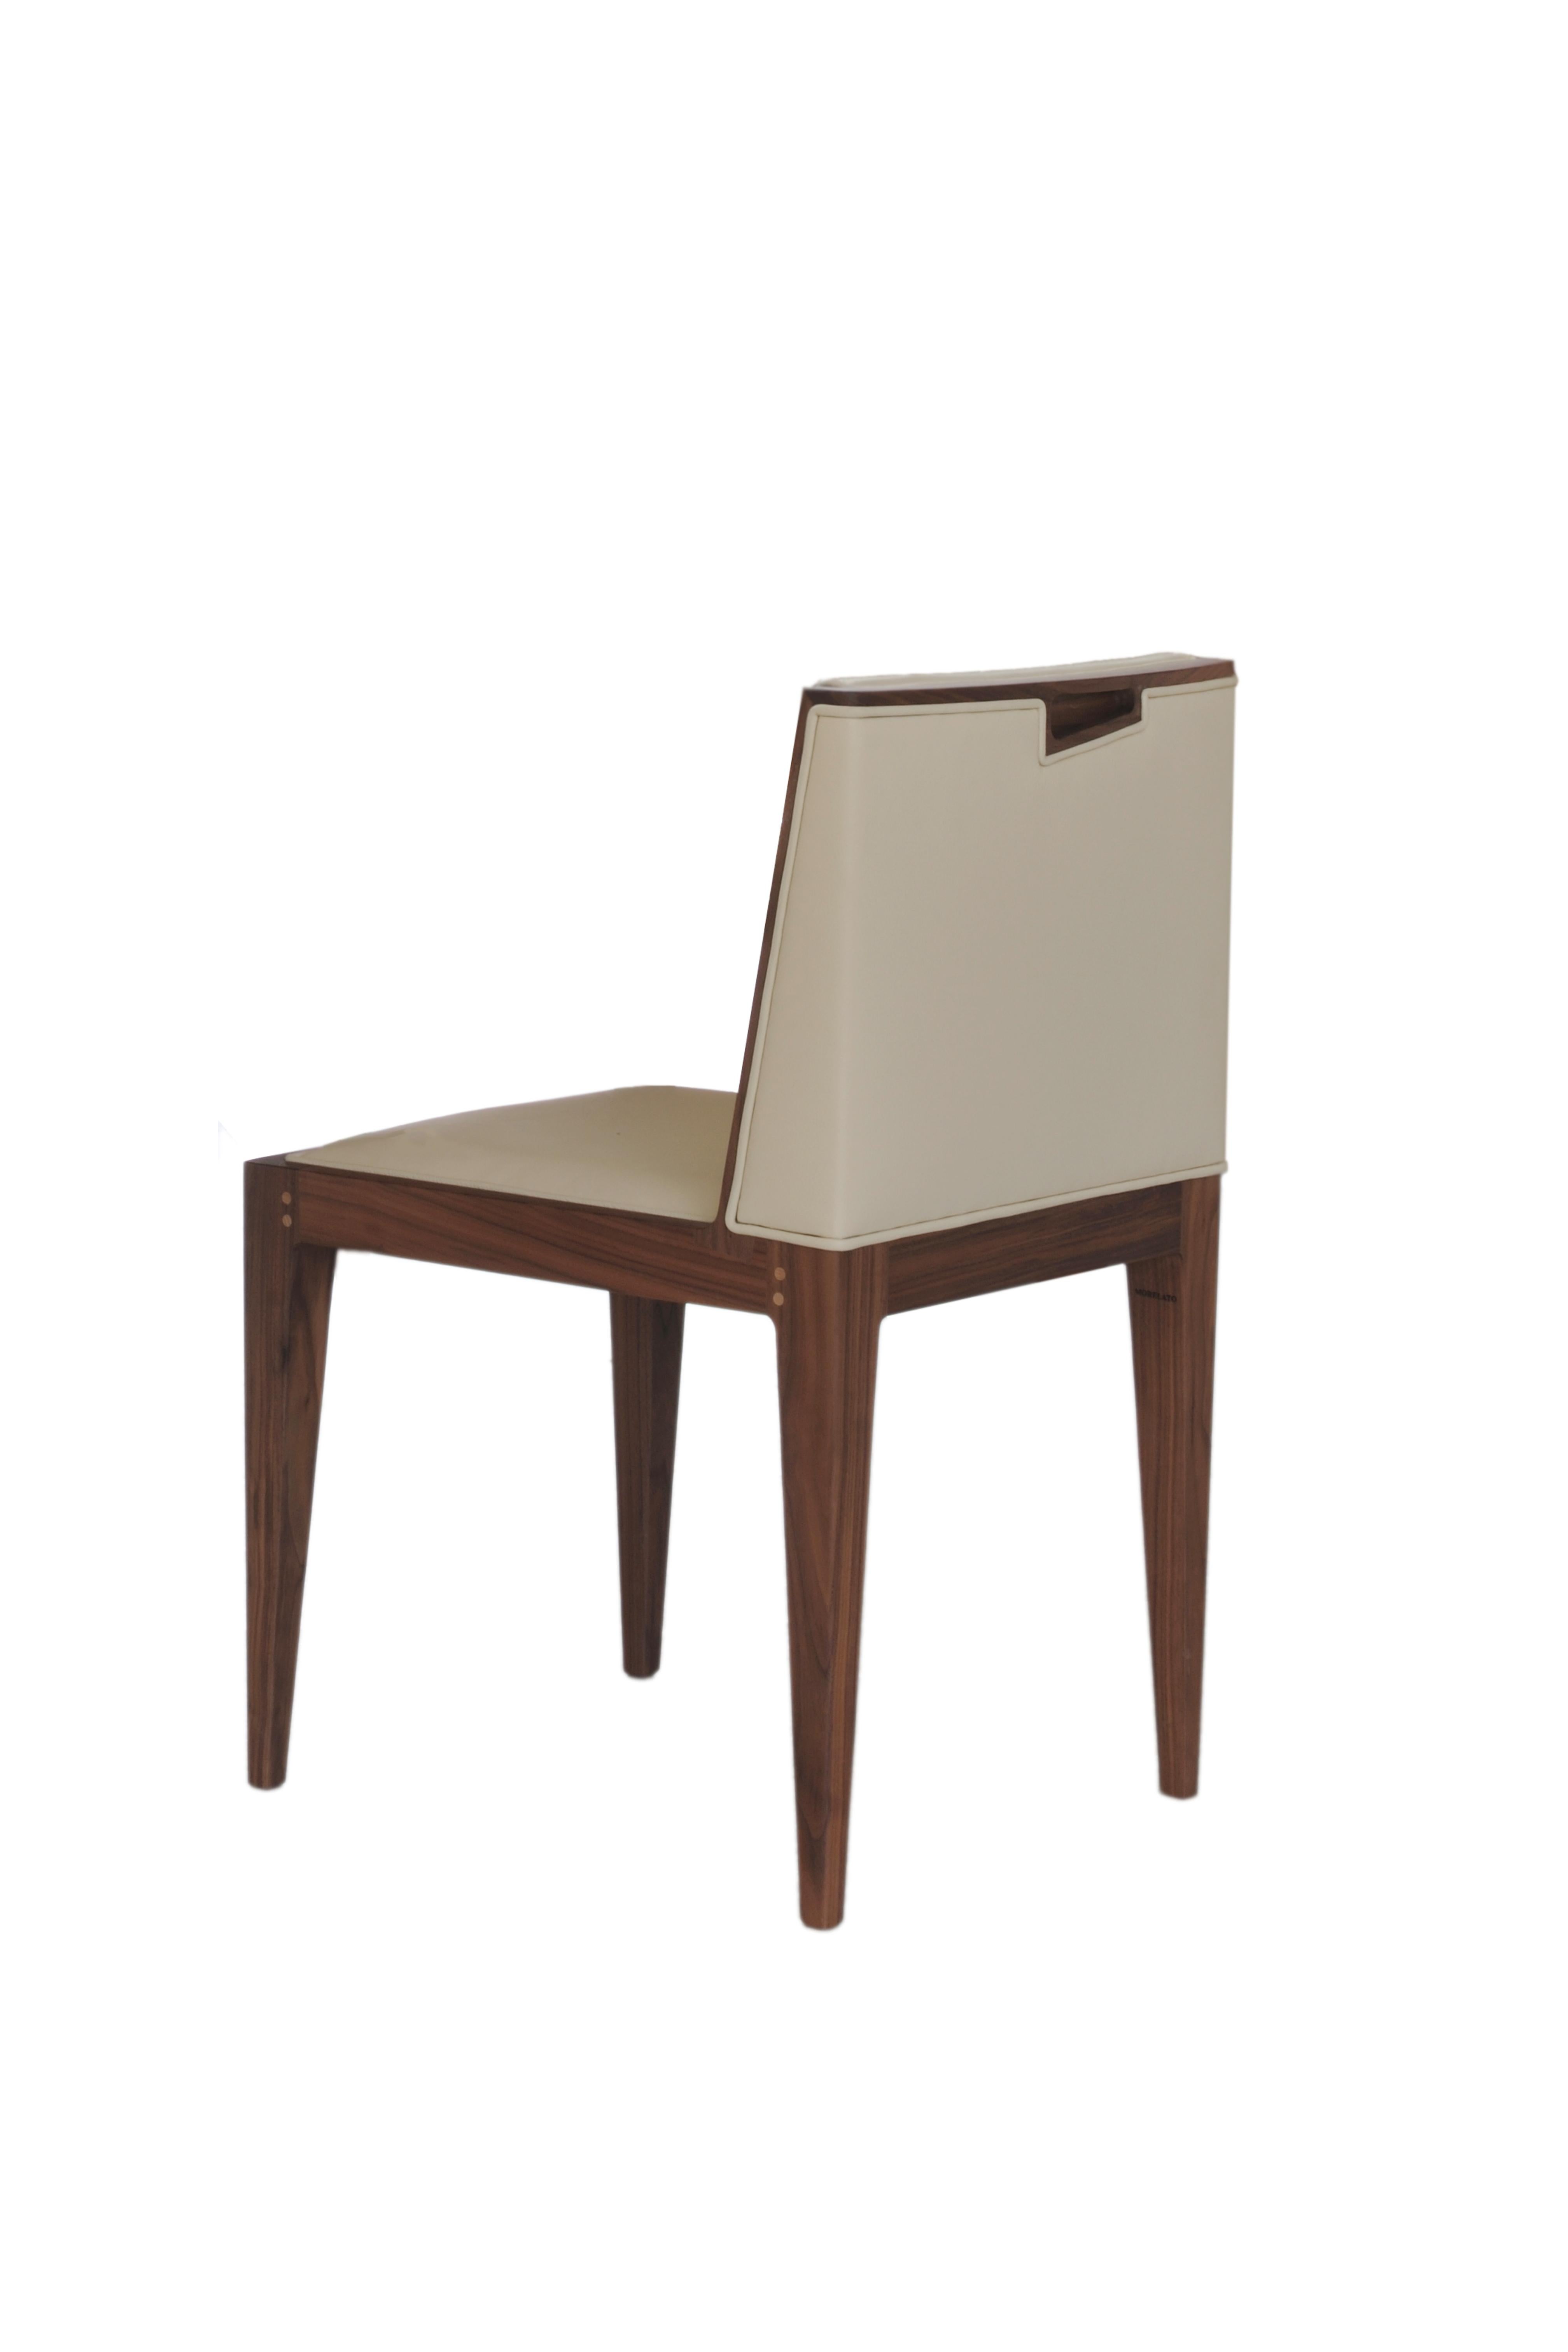 Contemporary upholstered chair made of ash wood. 
Padded cushion and backrest, upholstered with leather or fabric.
Special handle carved in the backrest.
Customizable with different wood finishes and coating materials/colors
Made in Italy by